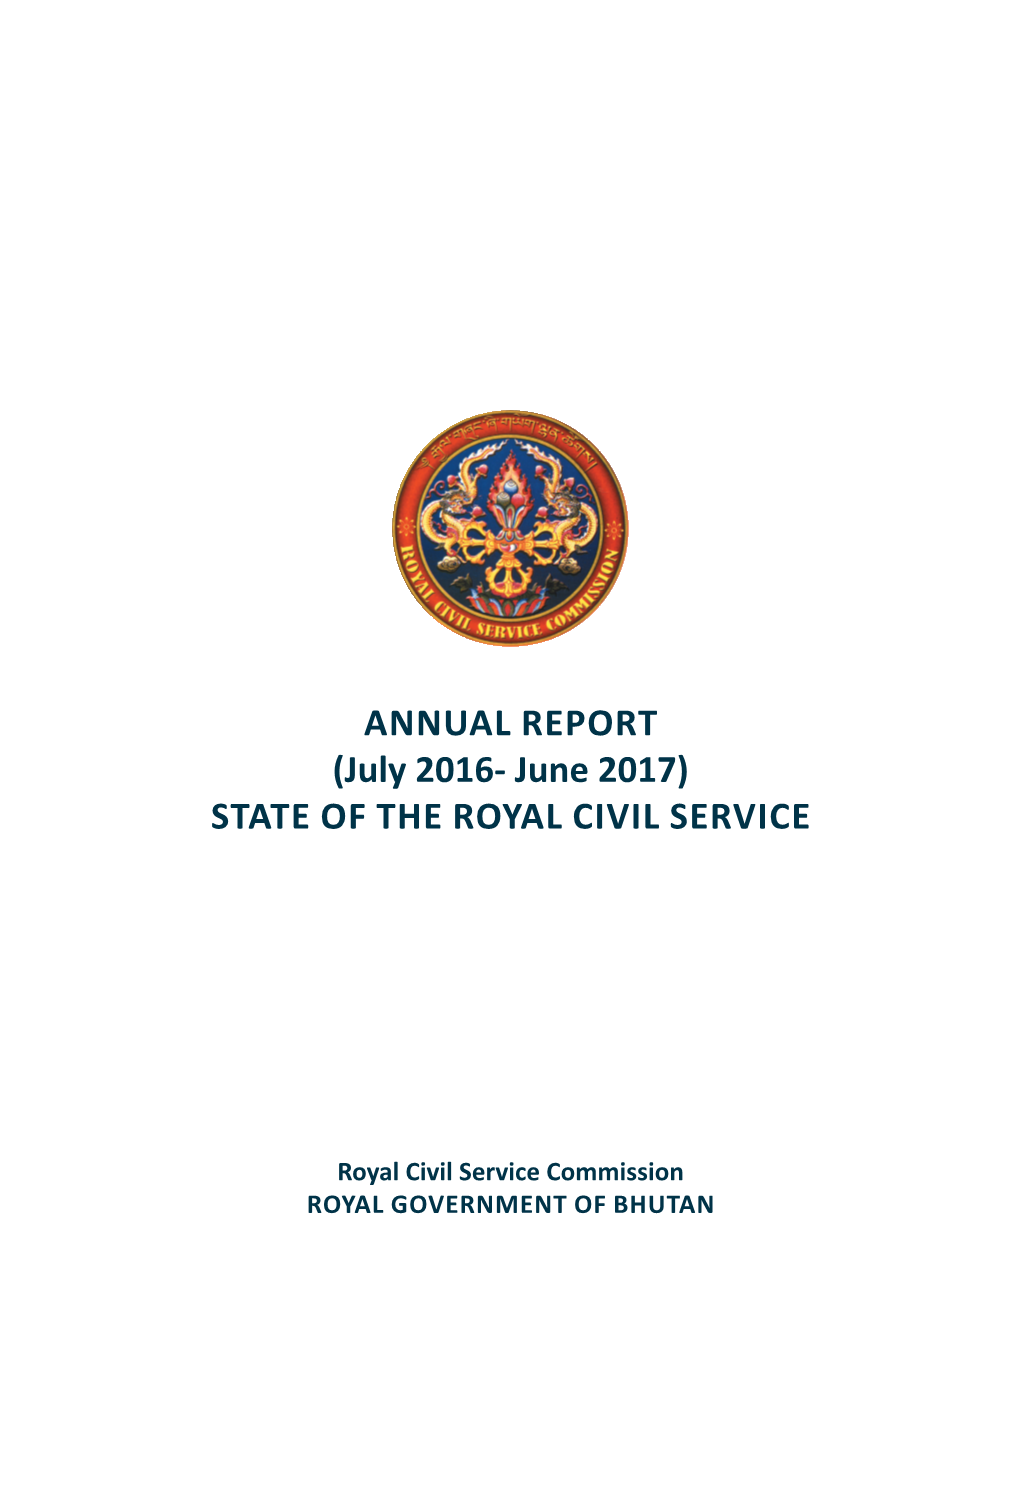 Annual Report (July 2016- June 2017) State of the Royal Civil Service